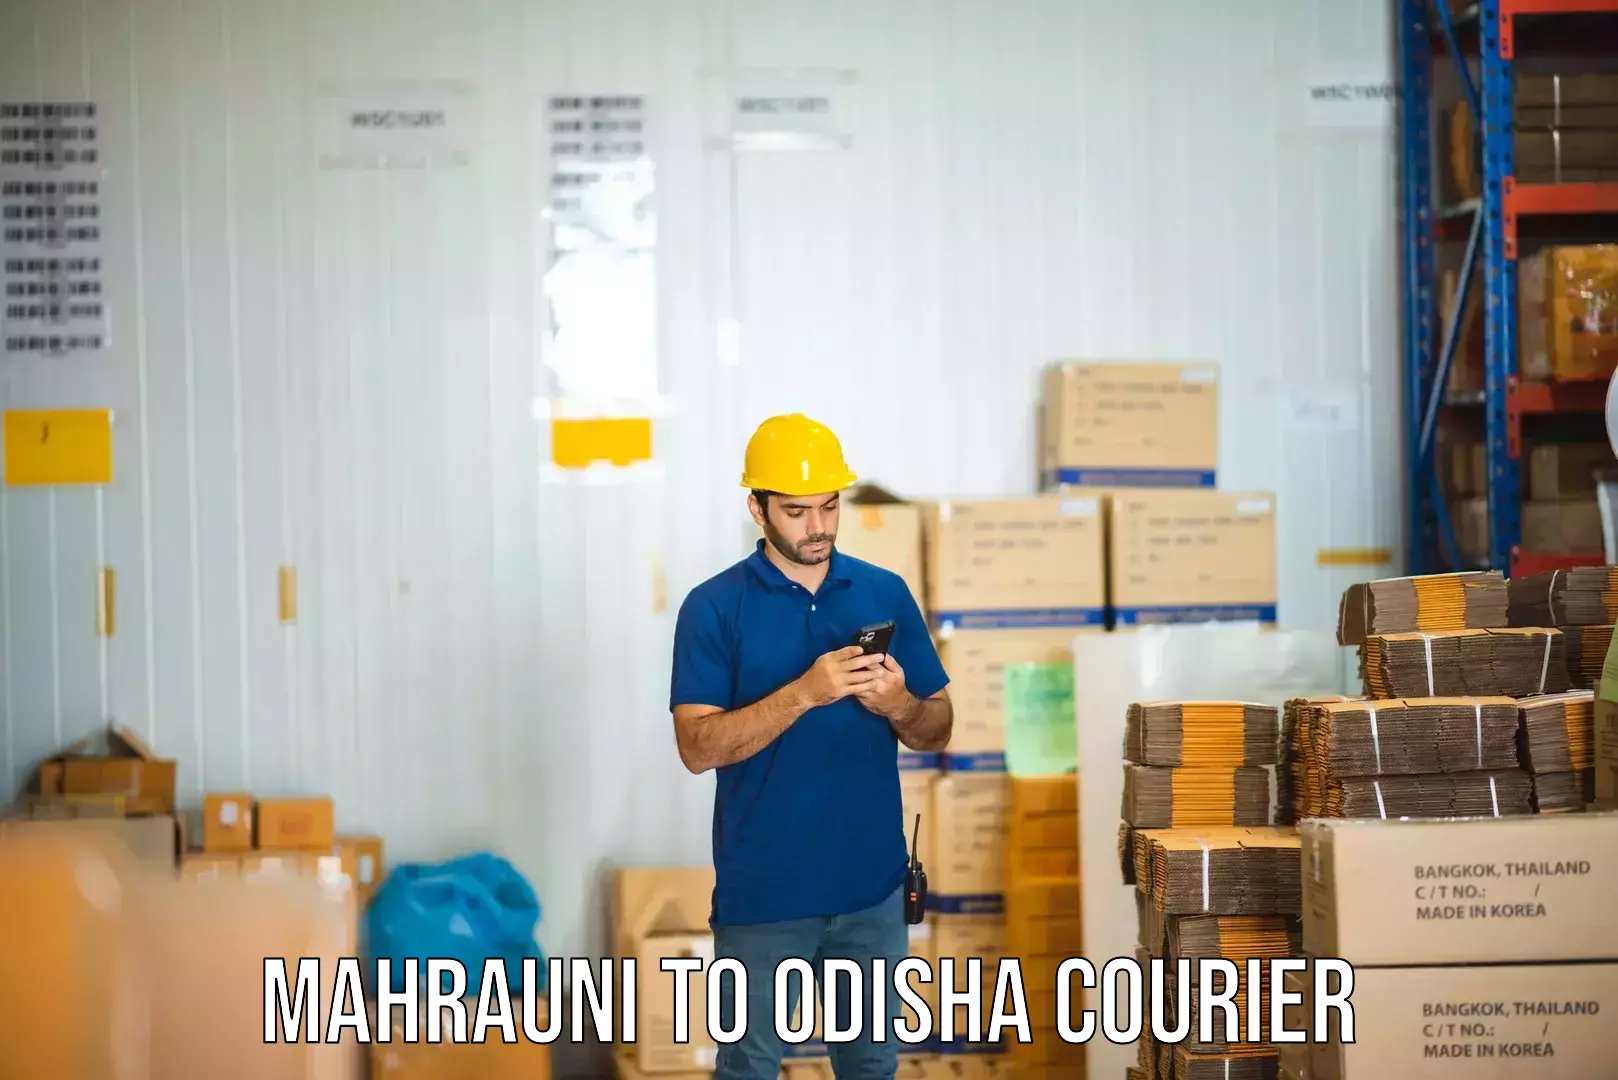 State-of-the-art courier technology in Mahrauni to Odisha